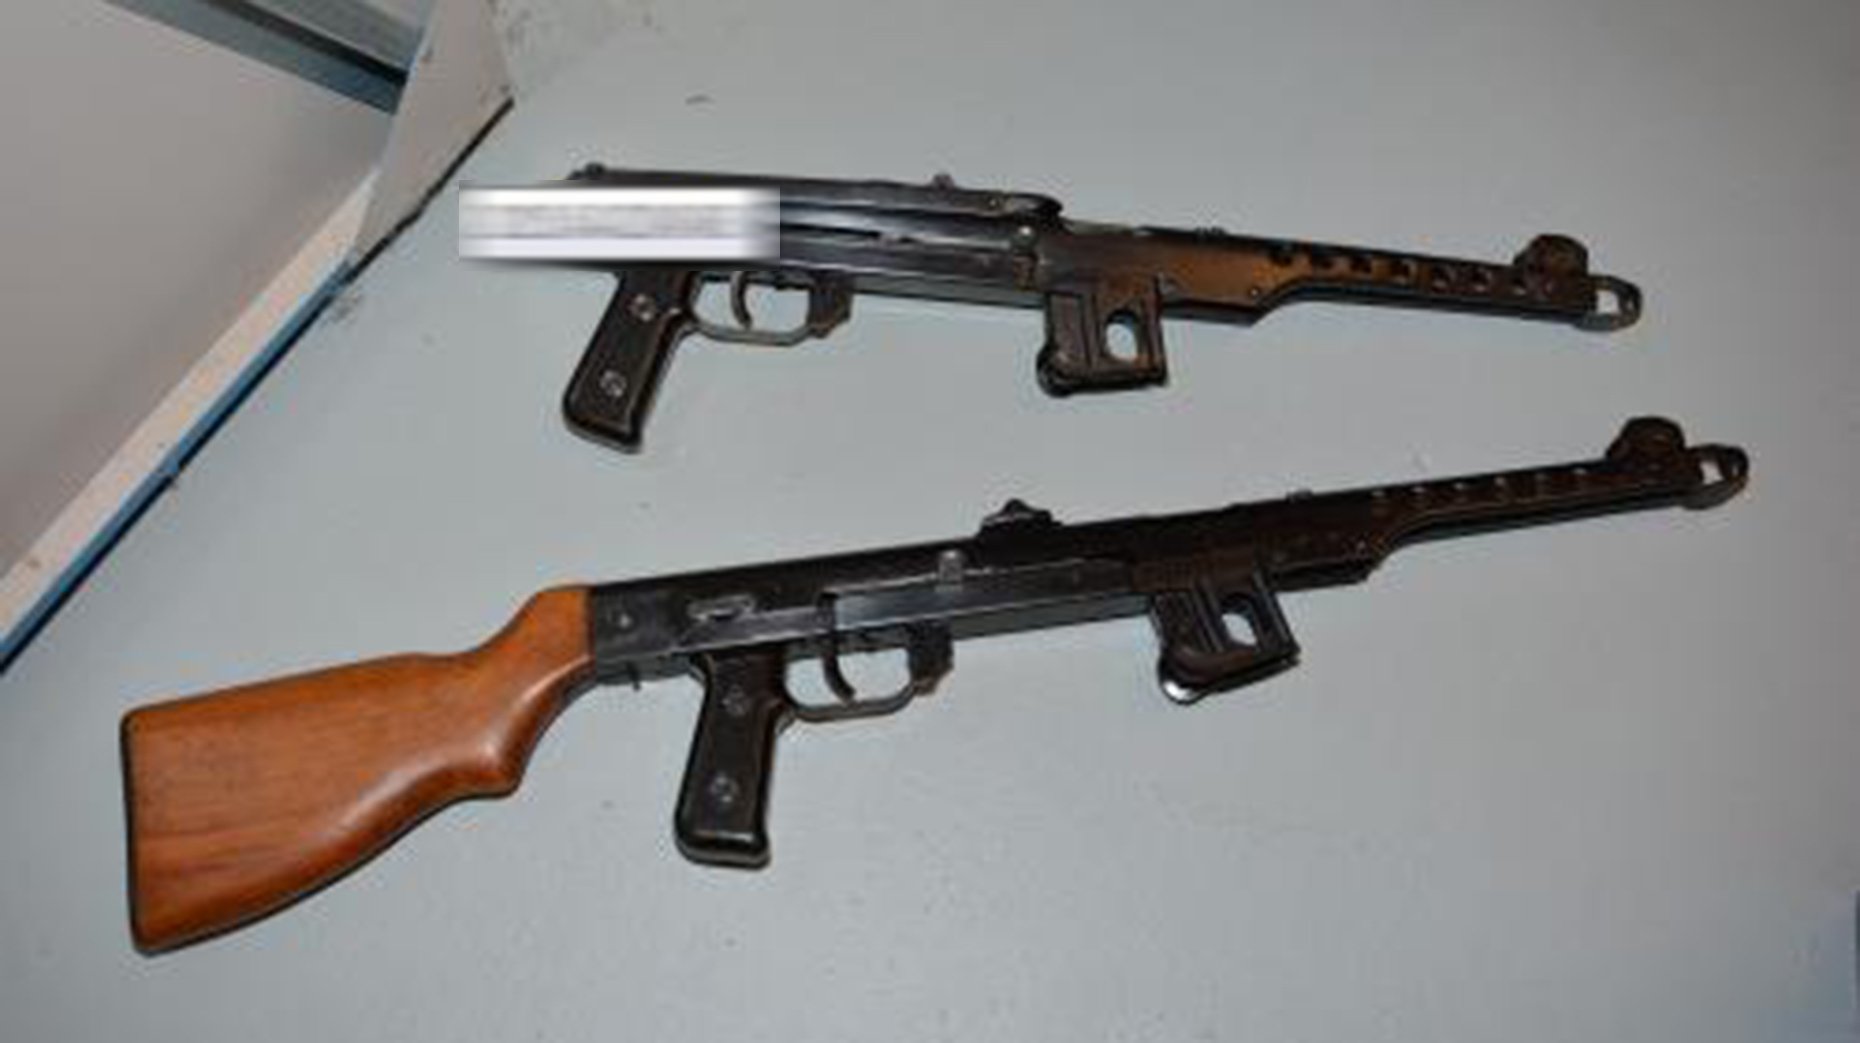 Unauthorised firearms discovered in possession of Mark Randall. Photo: Lincolnshire Police